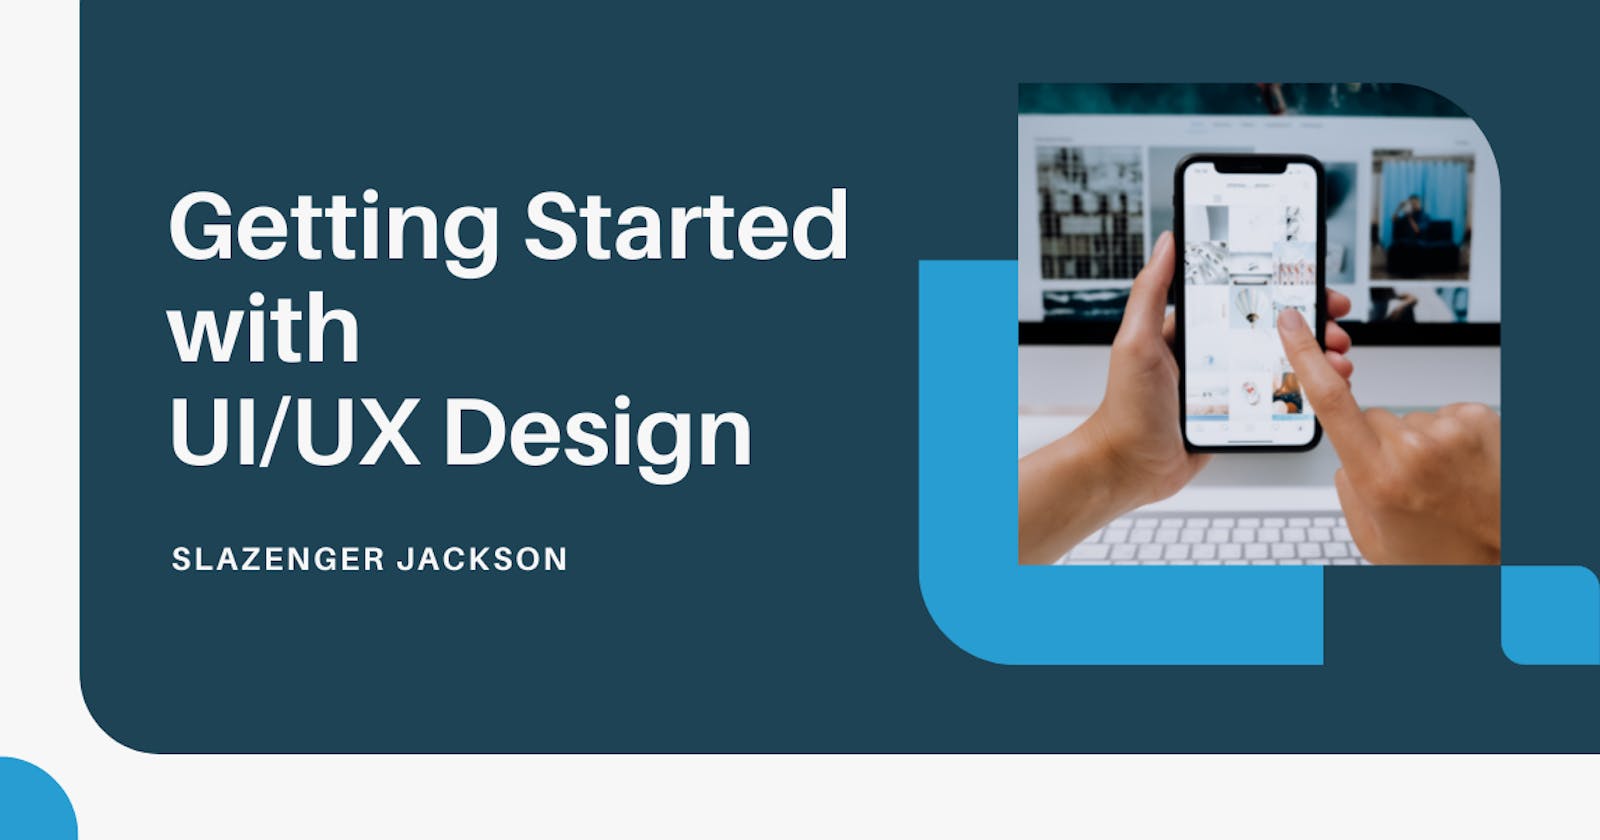 Getting Started With UI/UX Design